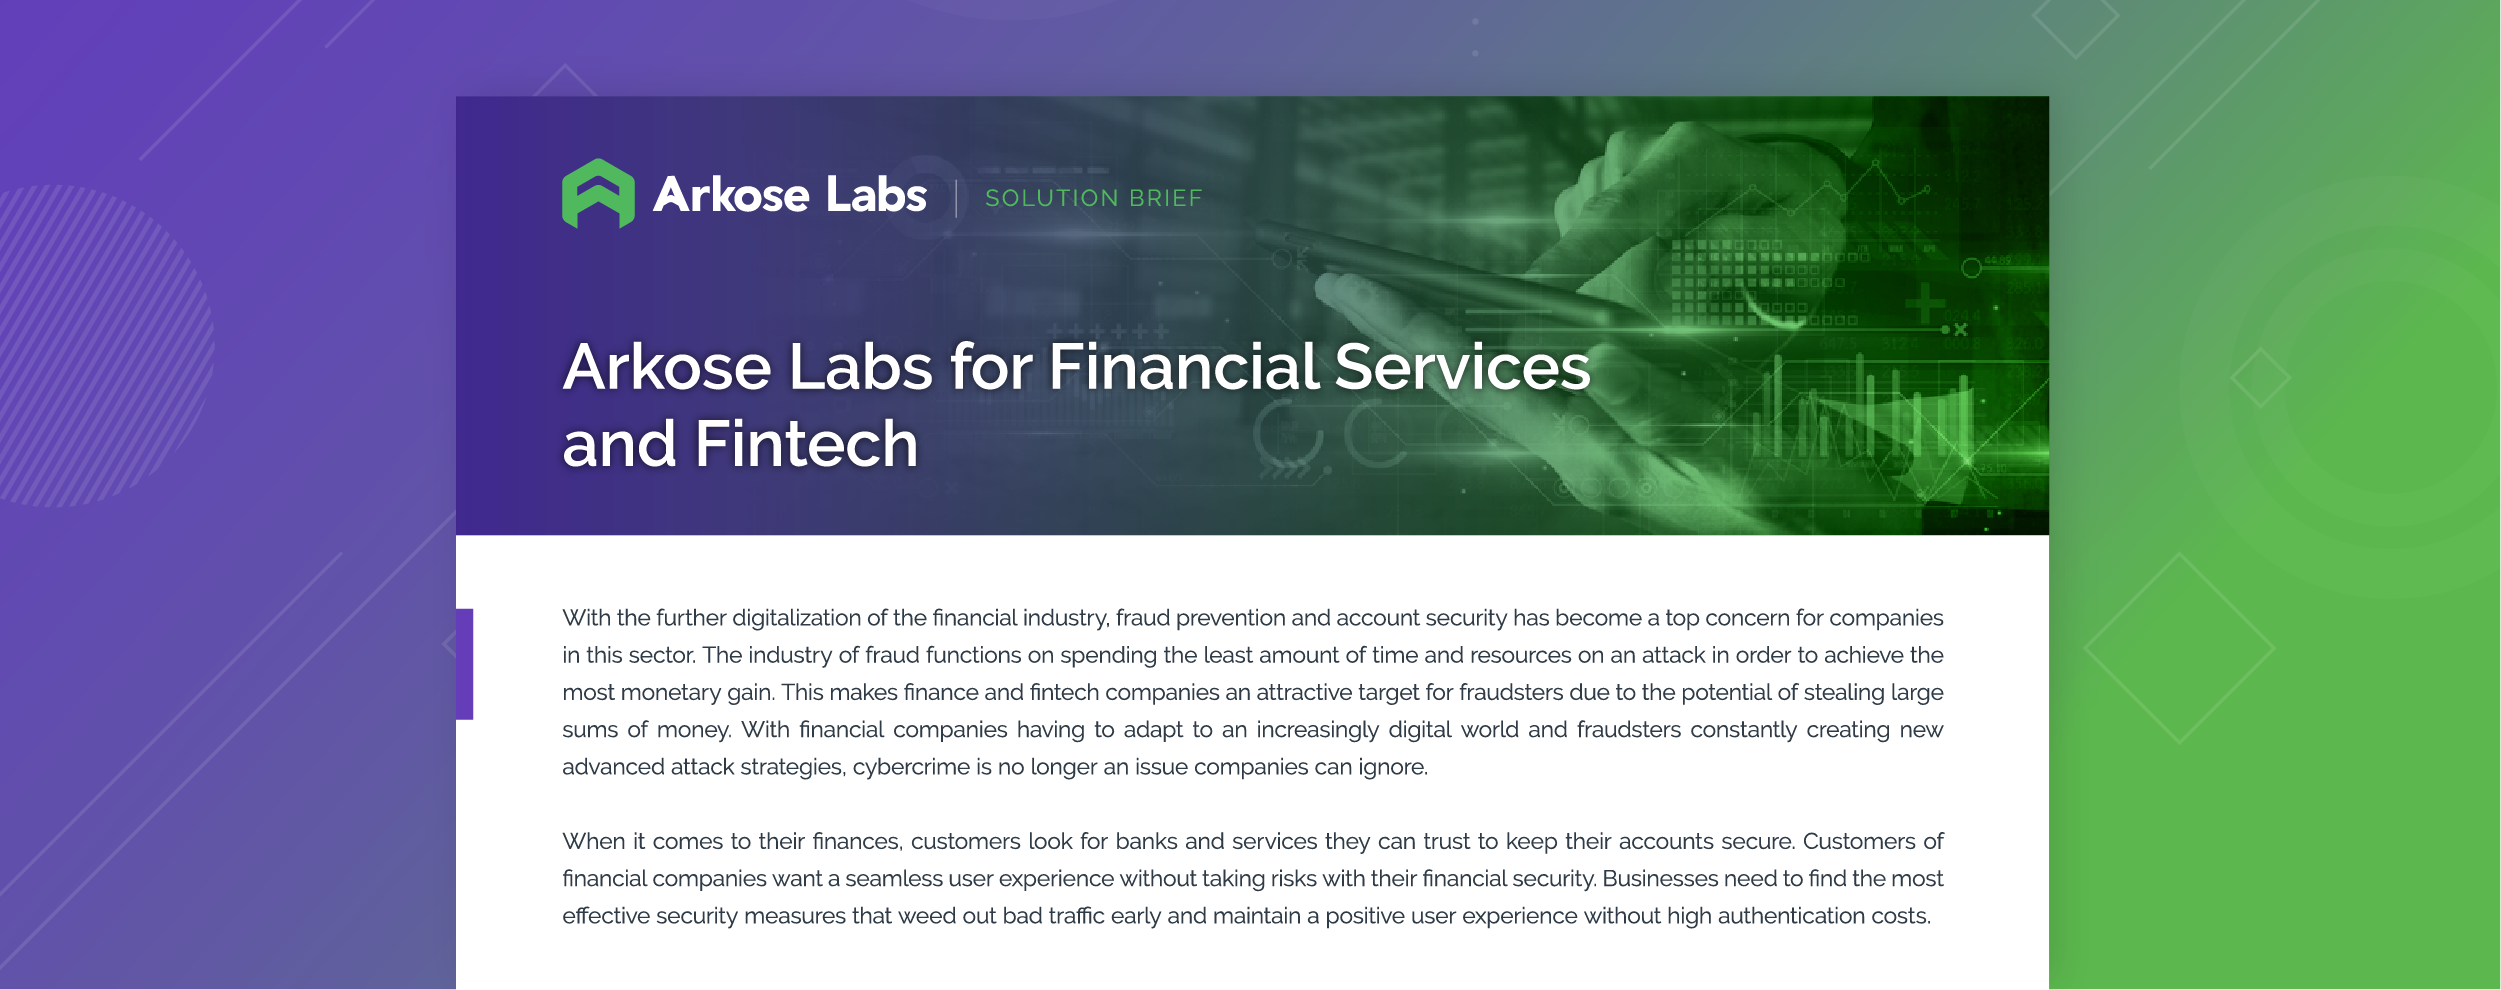 Arkose Labs for Financial Services and Fintech